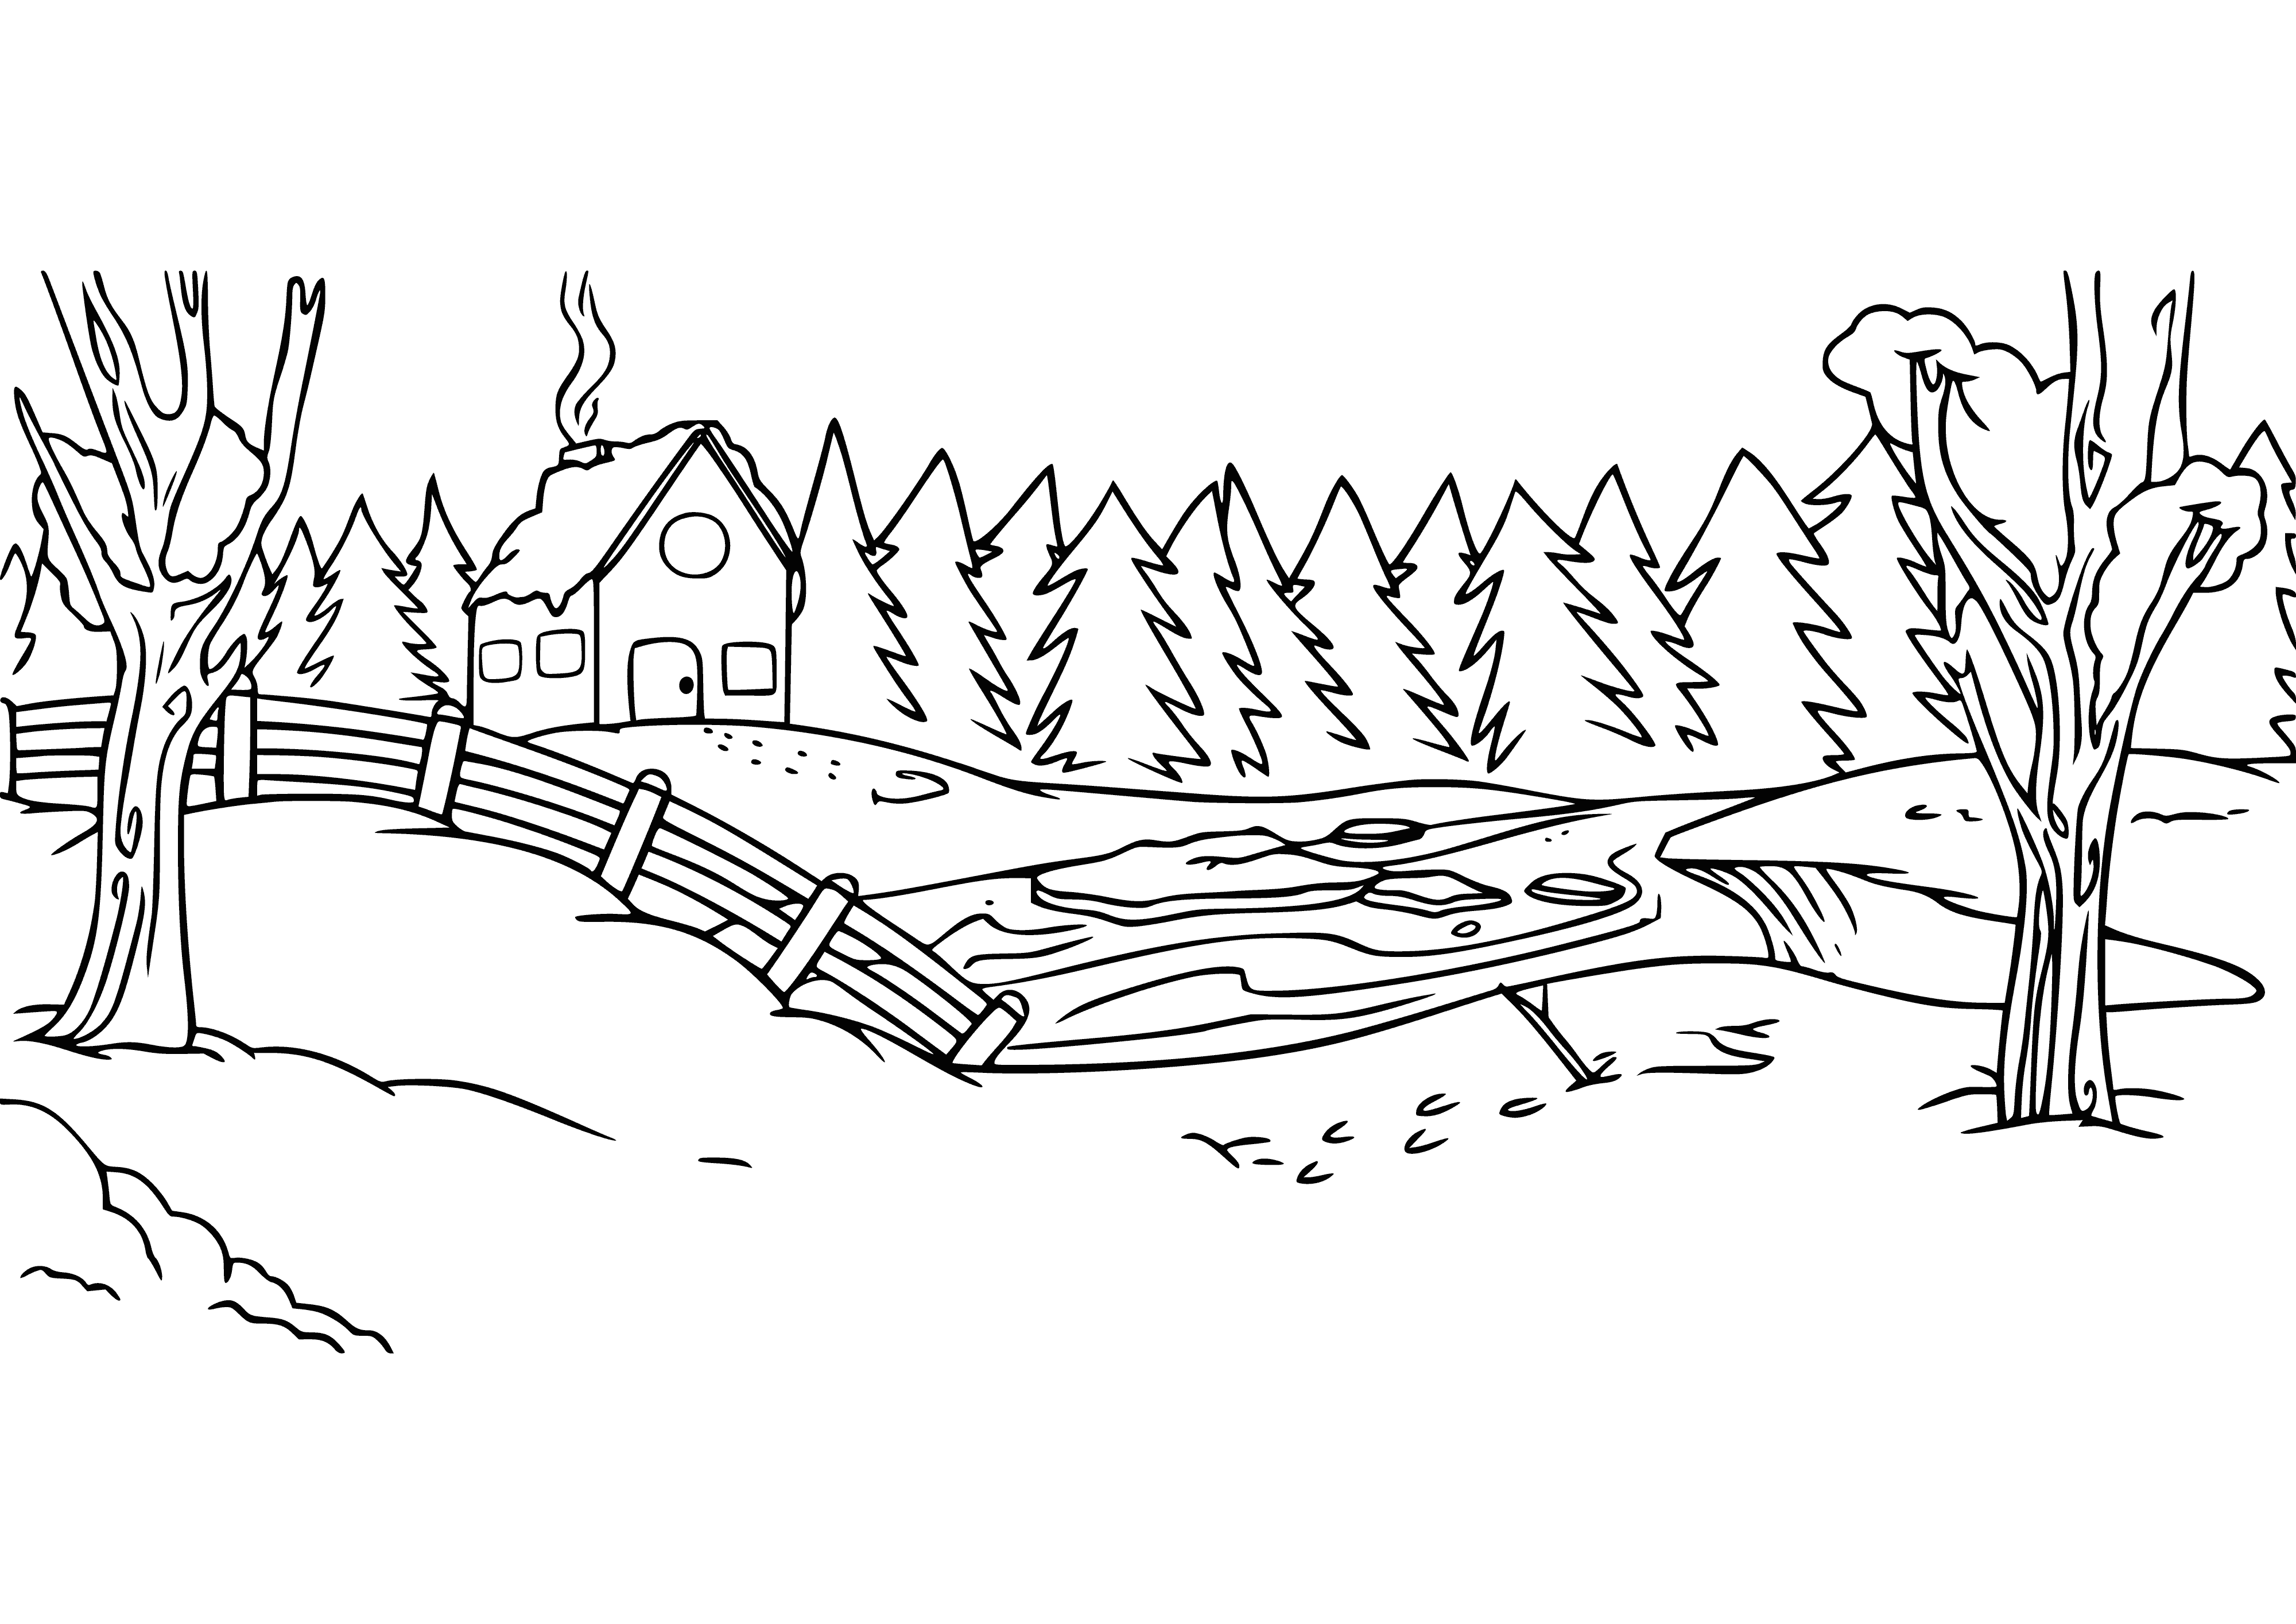 Ice drift coloring page